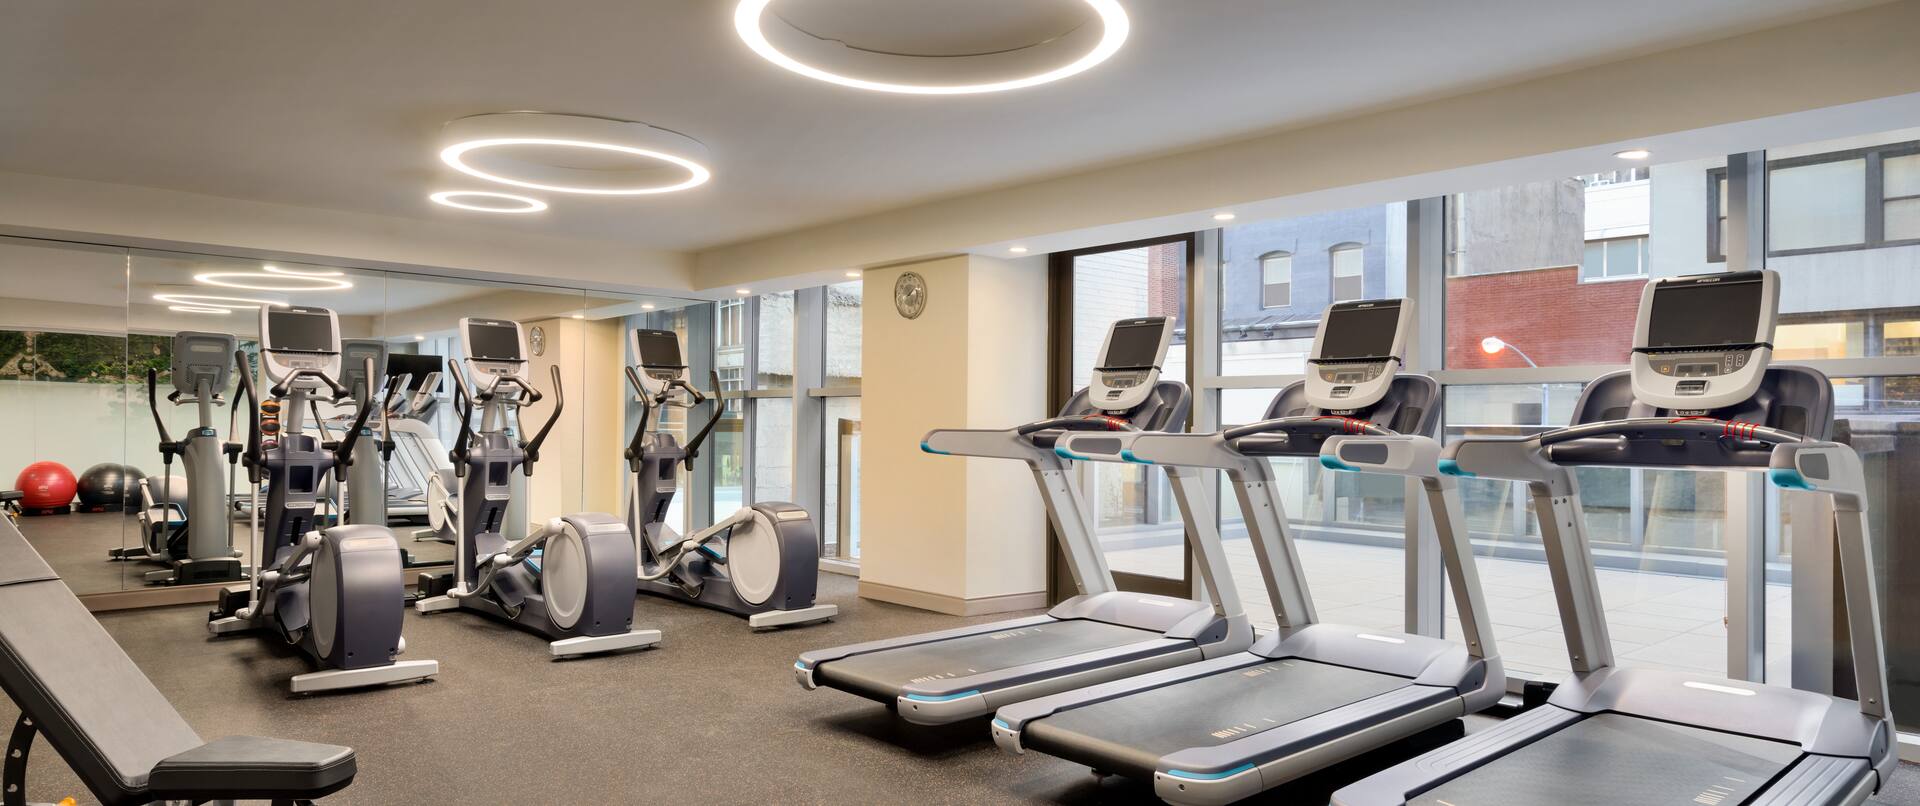 Fitness Center with Treadmills, Cross-Trainers and Weight Bench